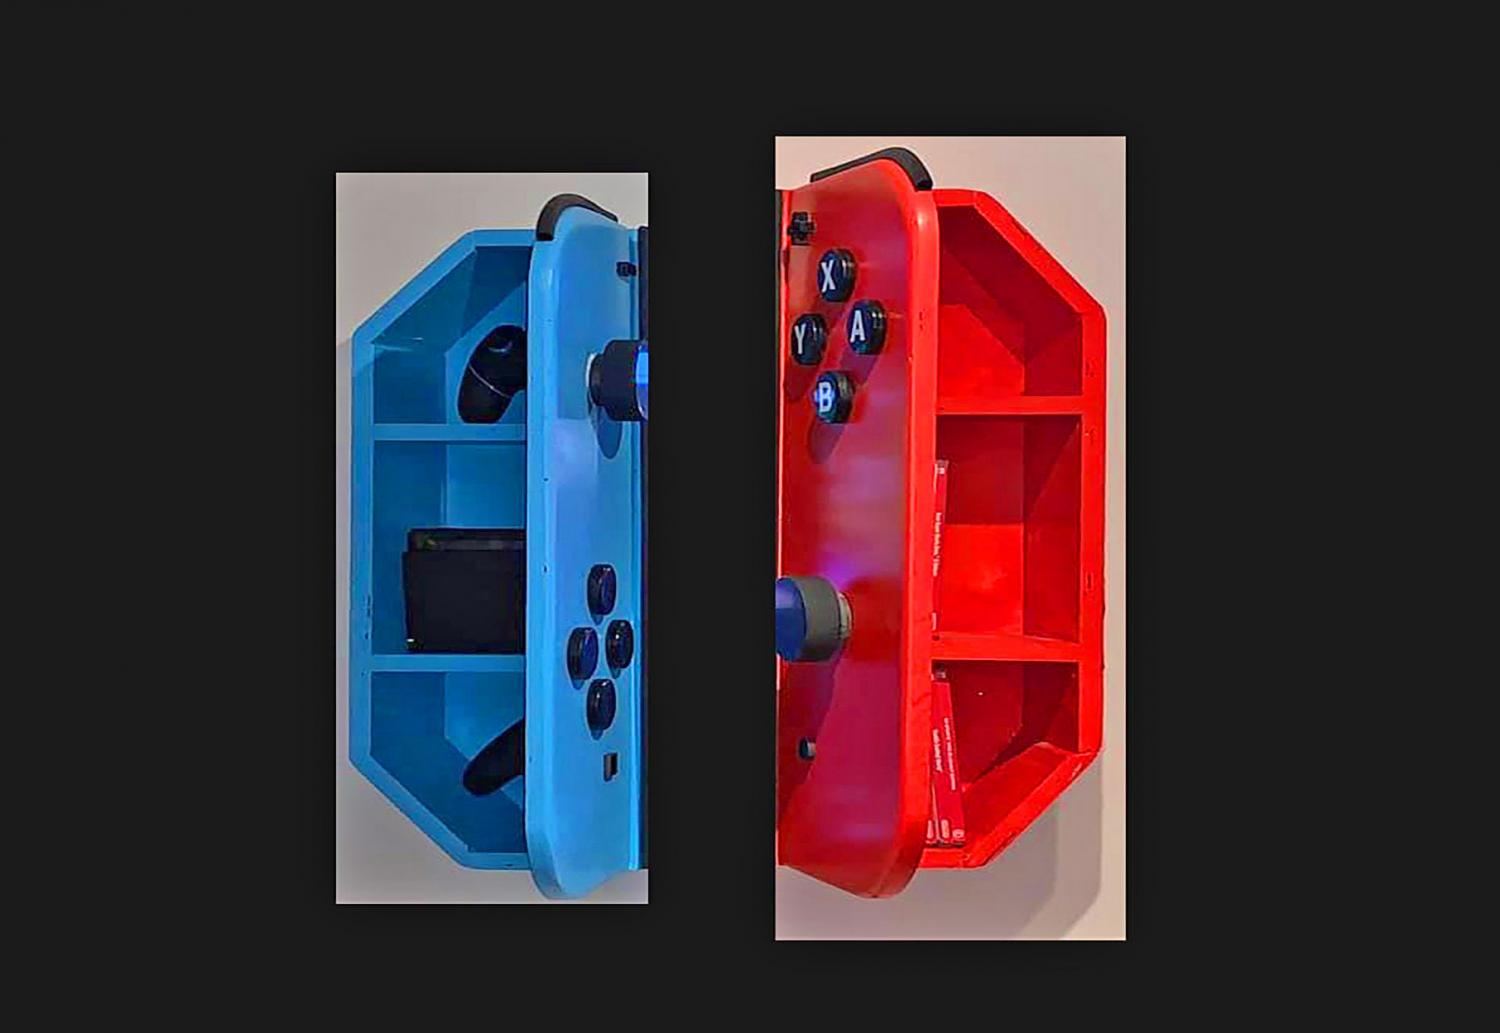 Wall-Mounted Cabinets Turn Your TV Into a Giant Nintendo Switch - Nintendo Switch TV Cabinets